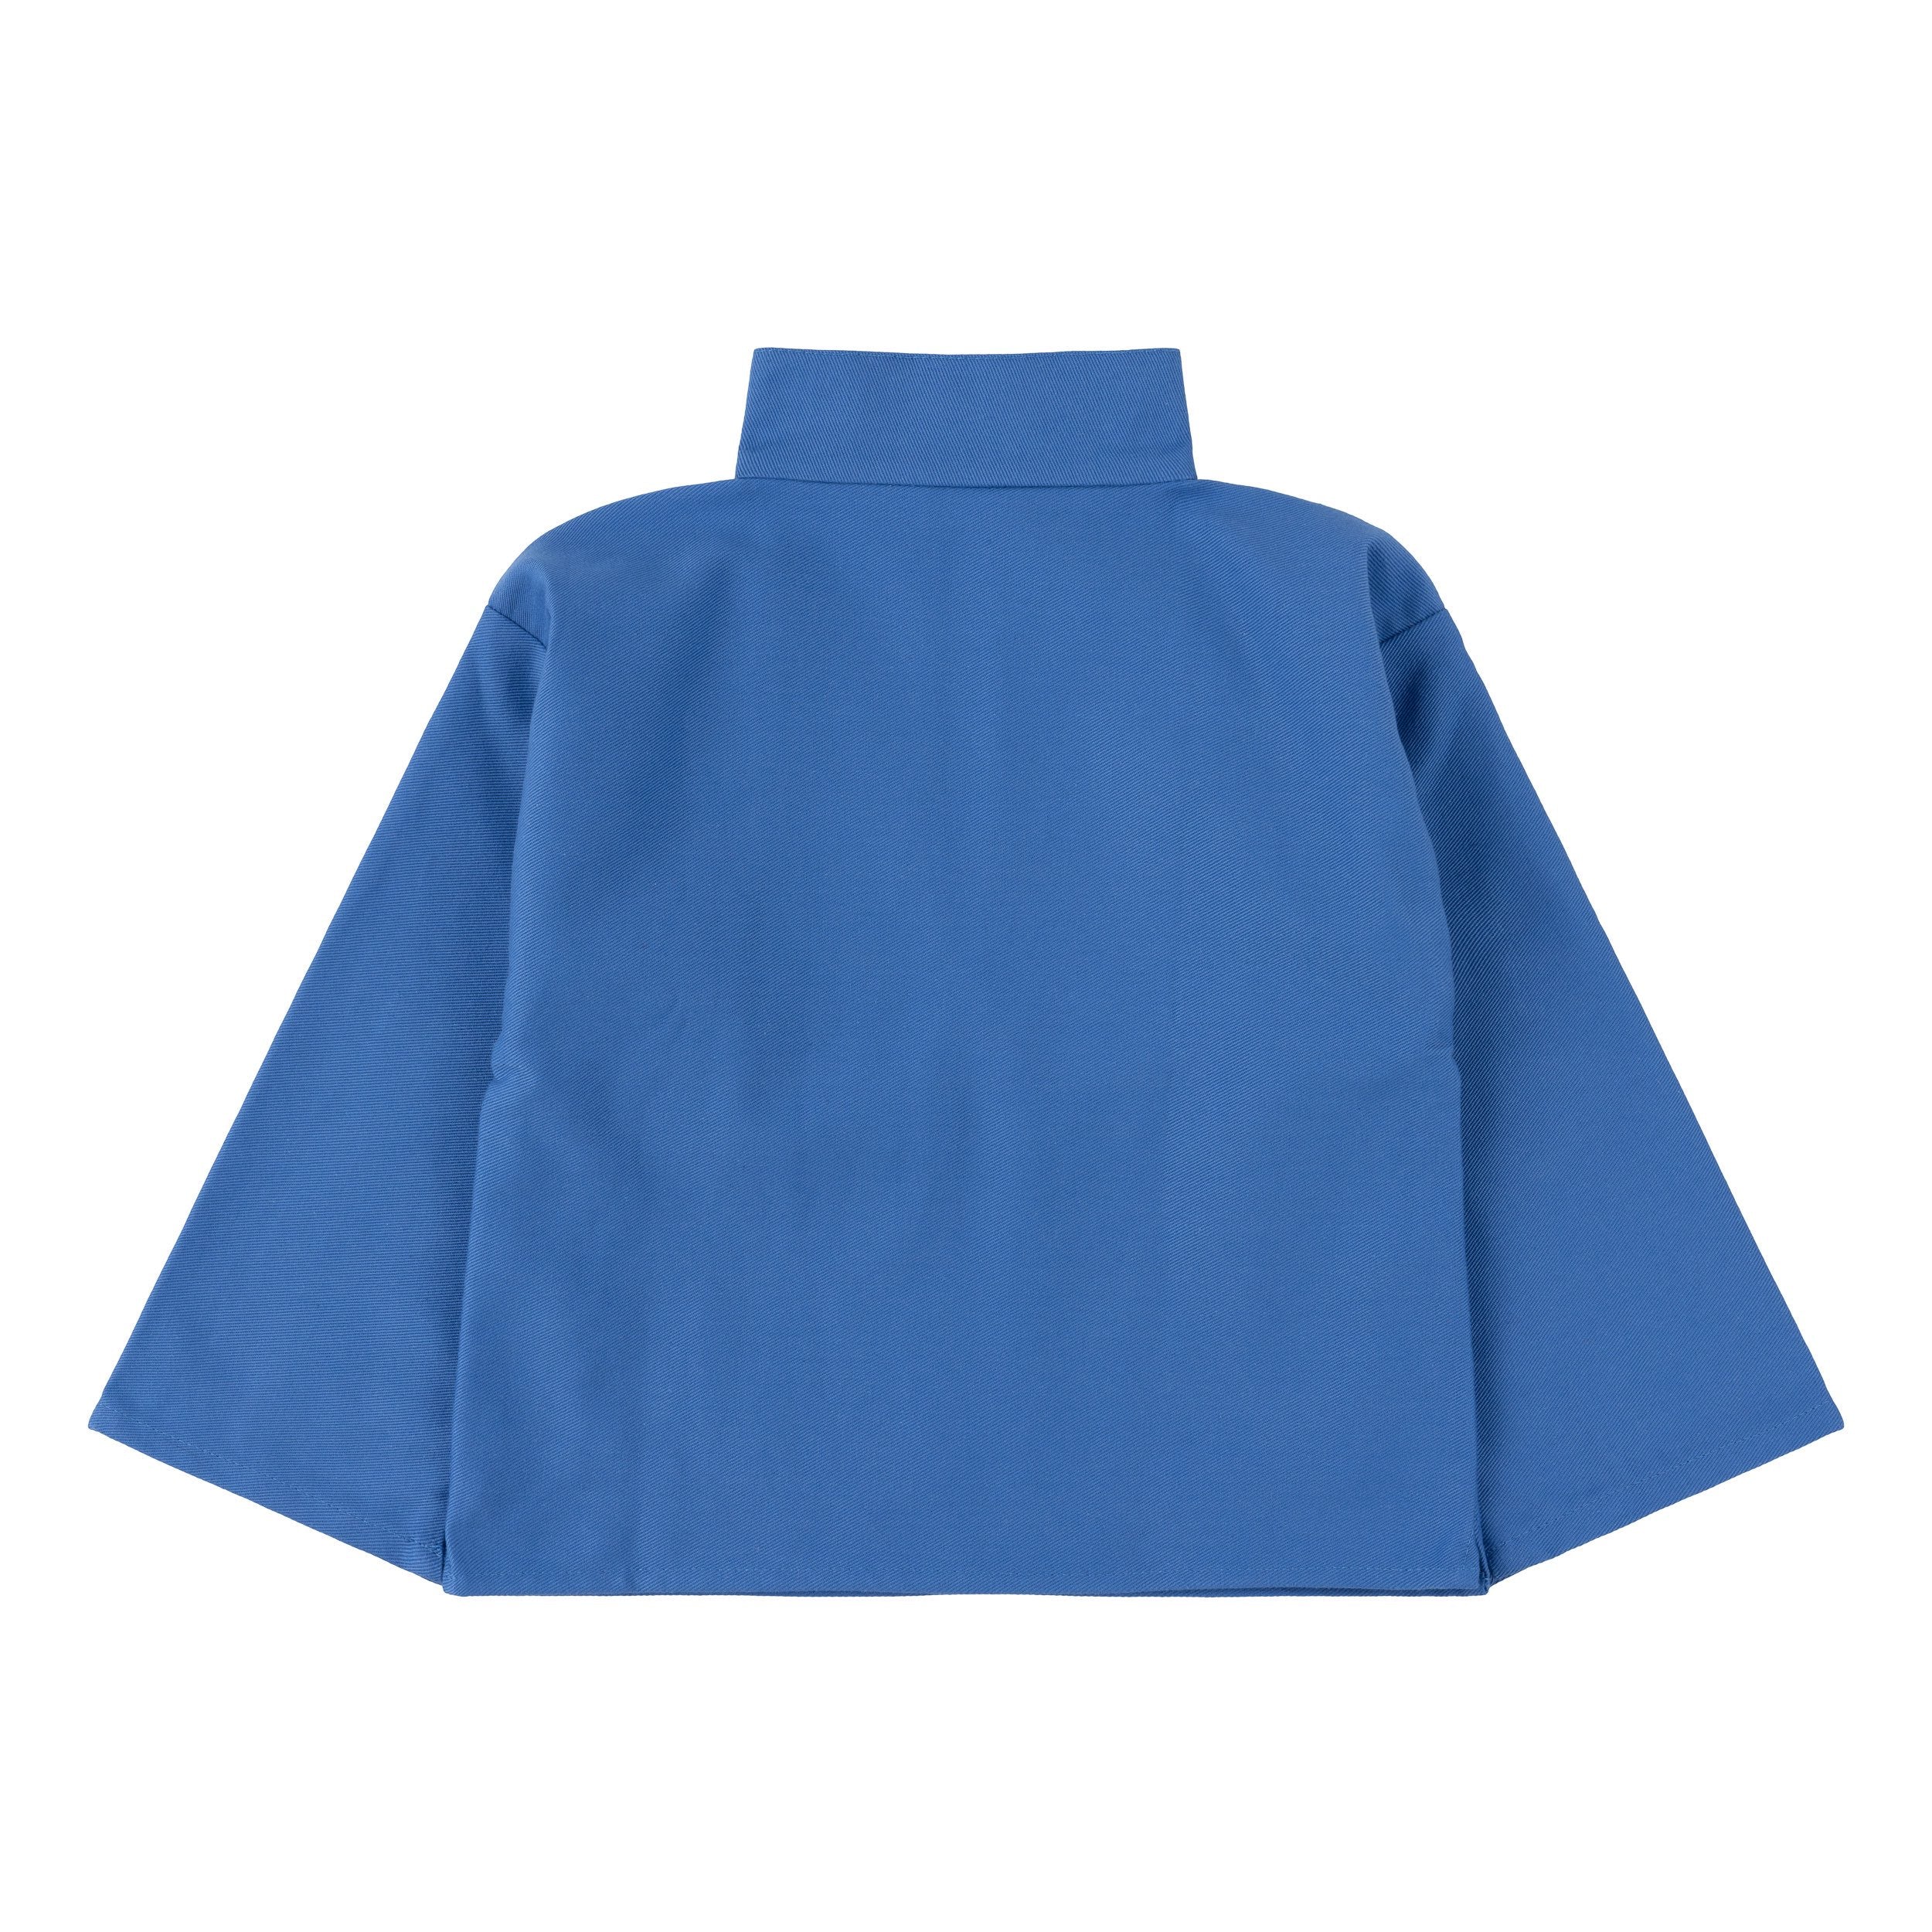 Carrier Company Child's Traditional Smock